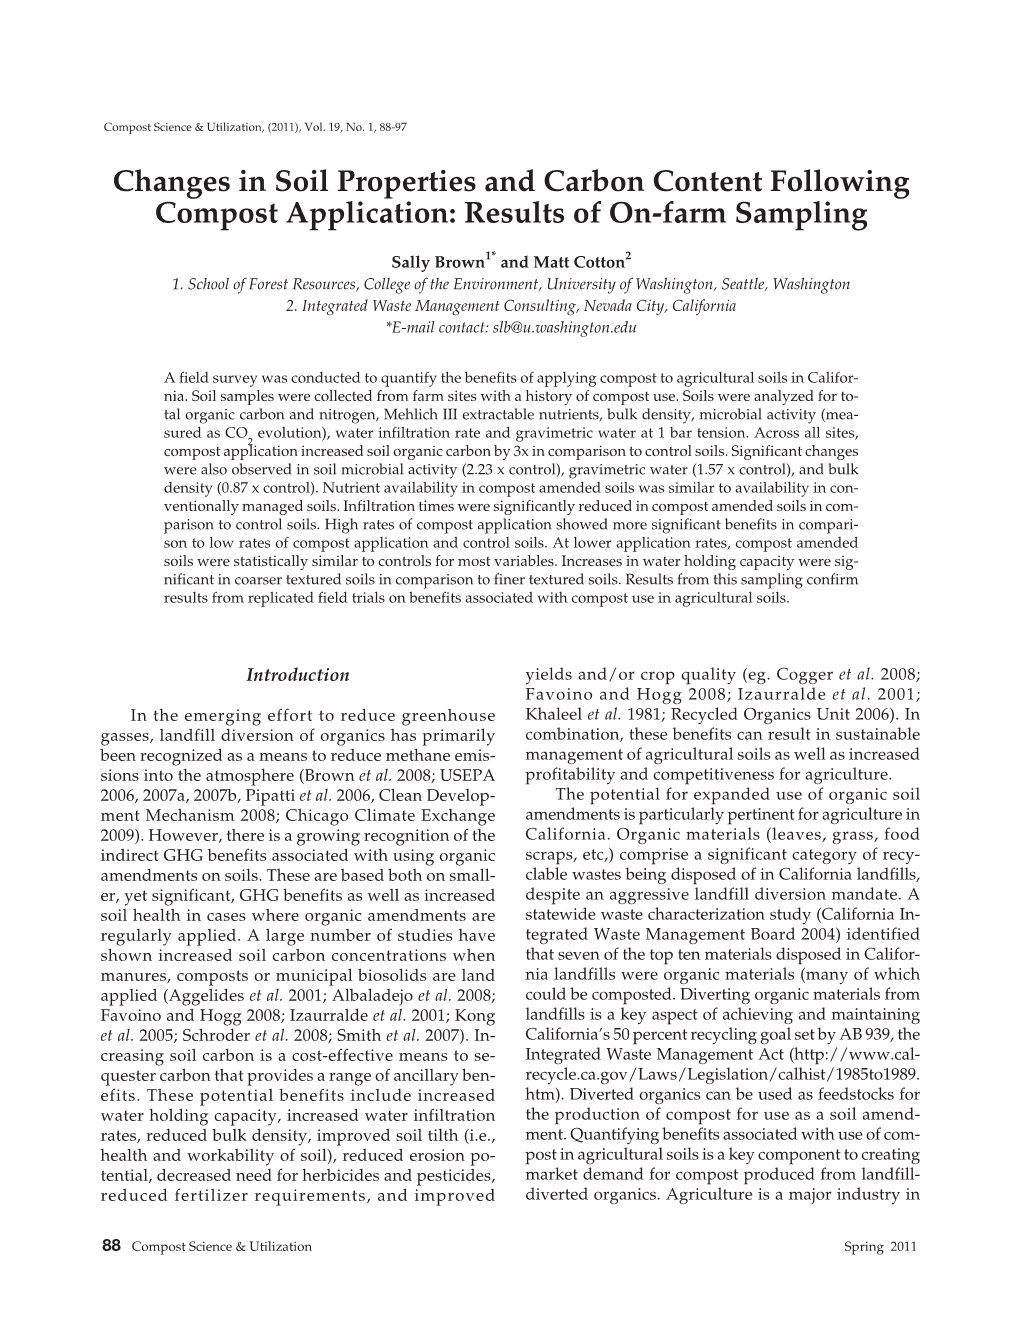 Changes in Soil Properties and Carbon Content Following Compost Application: Results of On-Farm Sampling